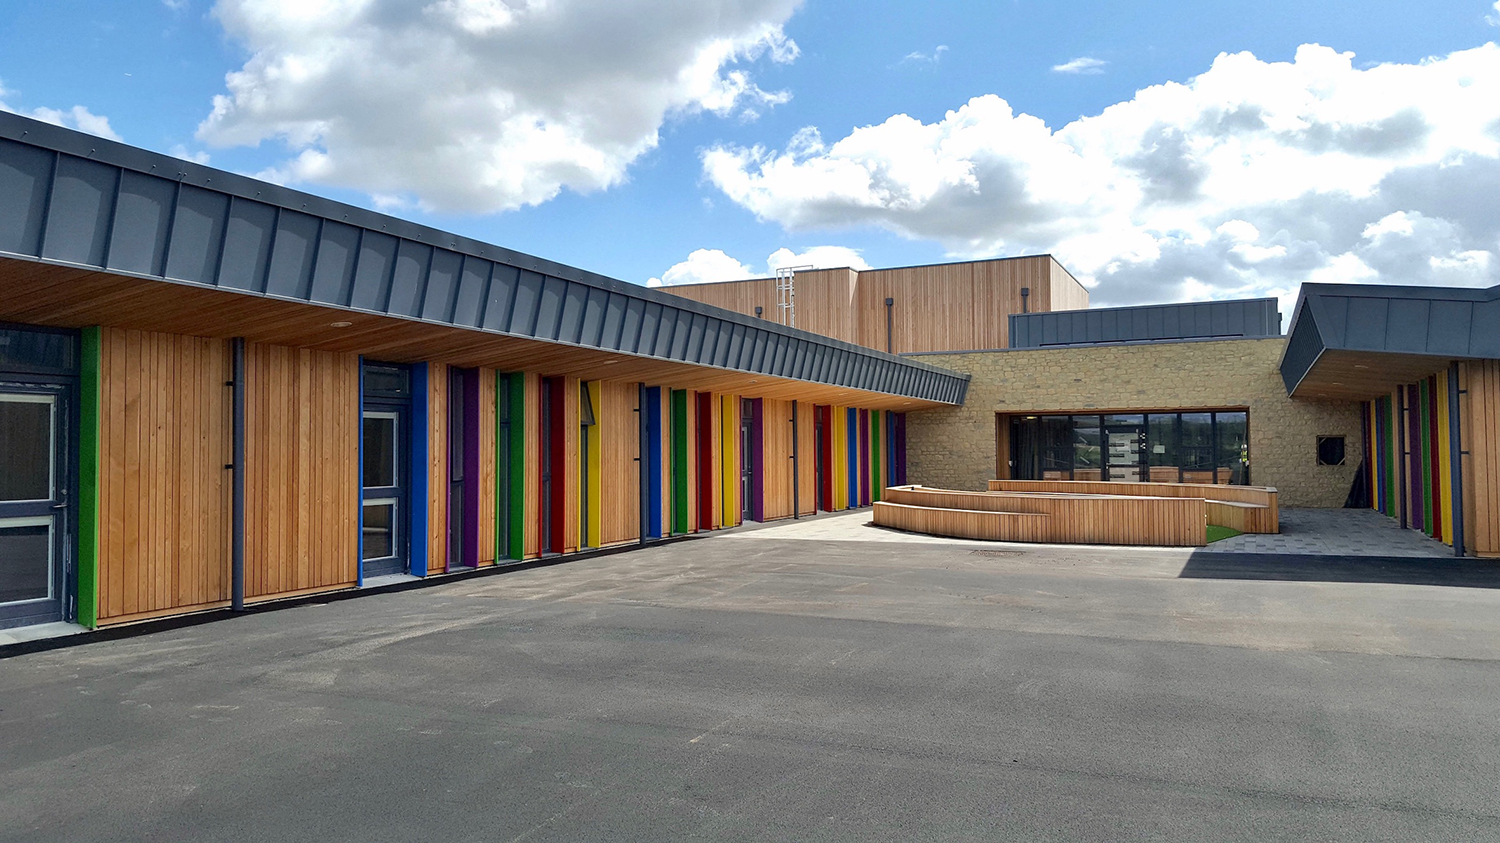 ASSA ABLOY Project Specification Group keeps up track record at Silverstone Primary School